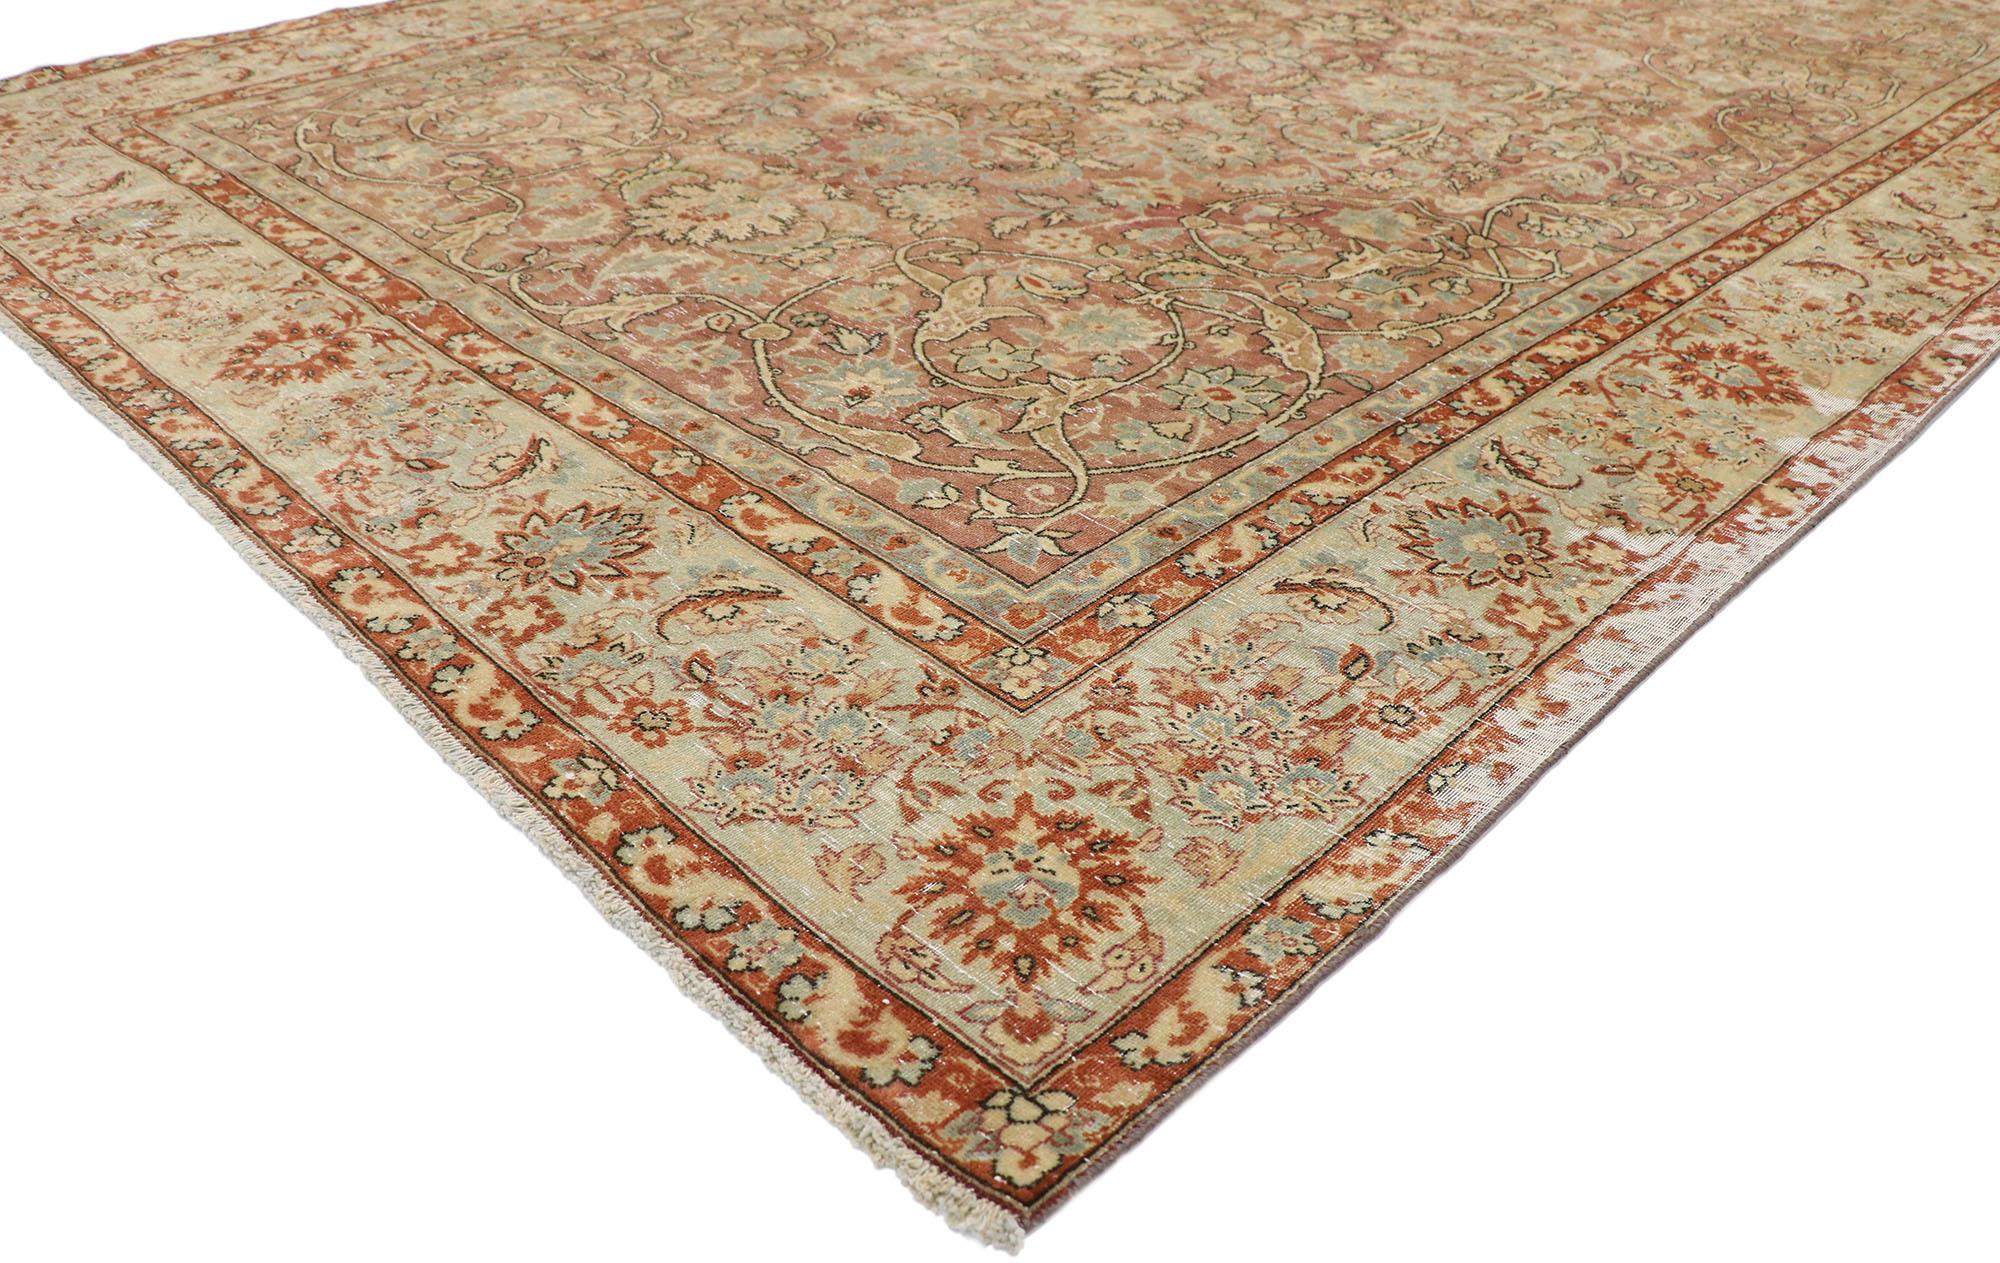 60846, distressed antique Persian Tabriz rug with rustic Italian Tuscan style. Cleverly composed and distinctively well-balanced, this hand knotted wool distressed antique Persian Tabriz rug will take on a curated lived-in look that feels timeless